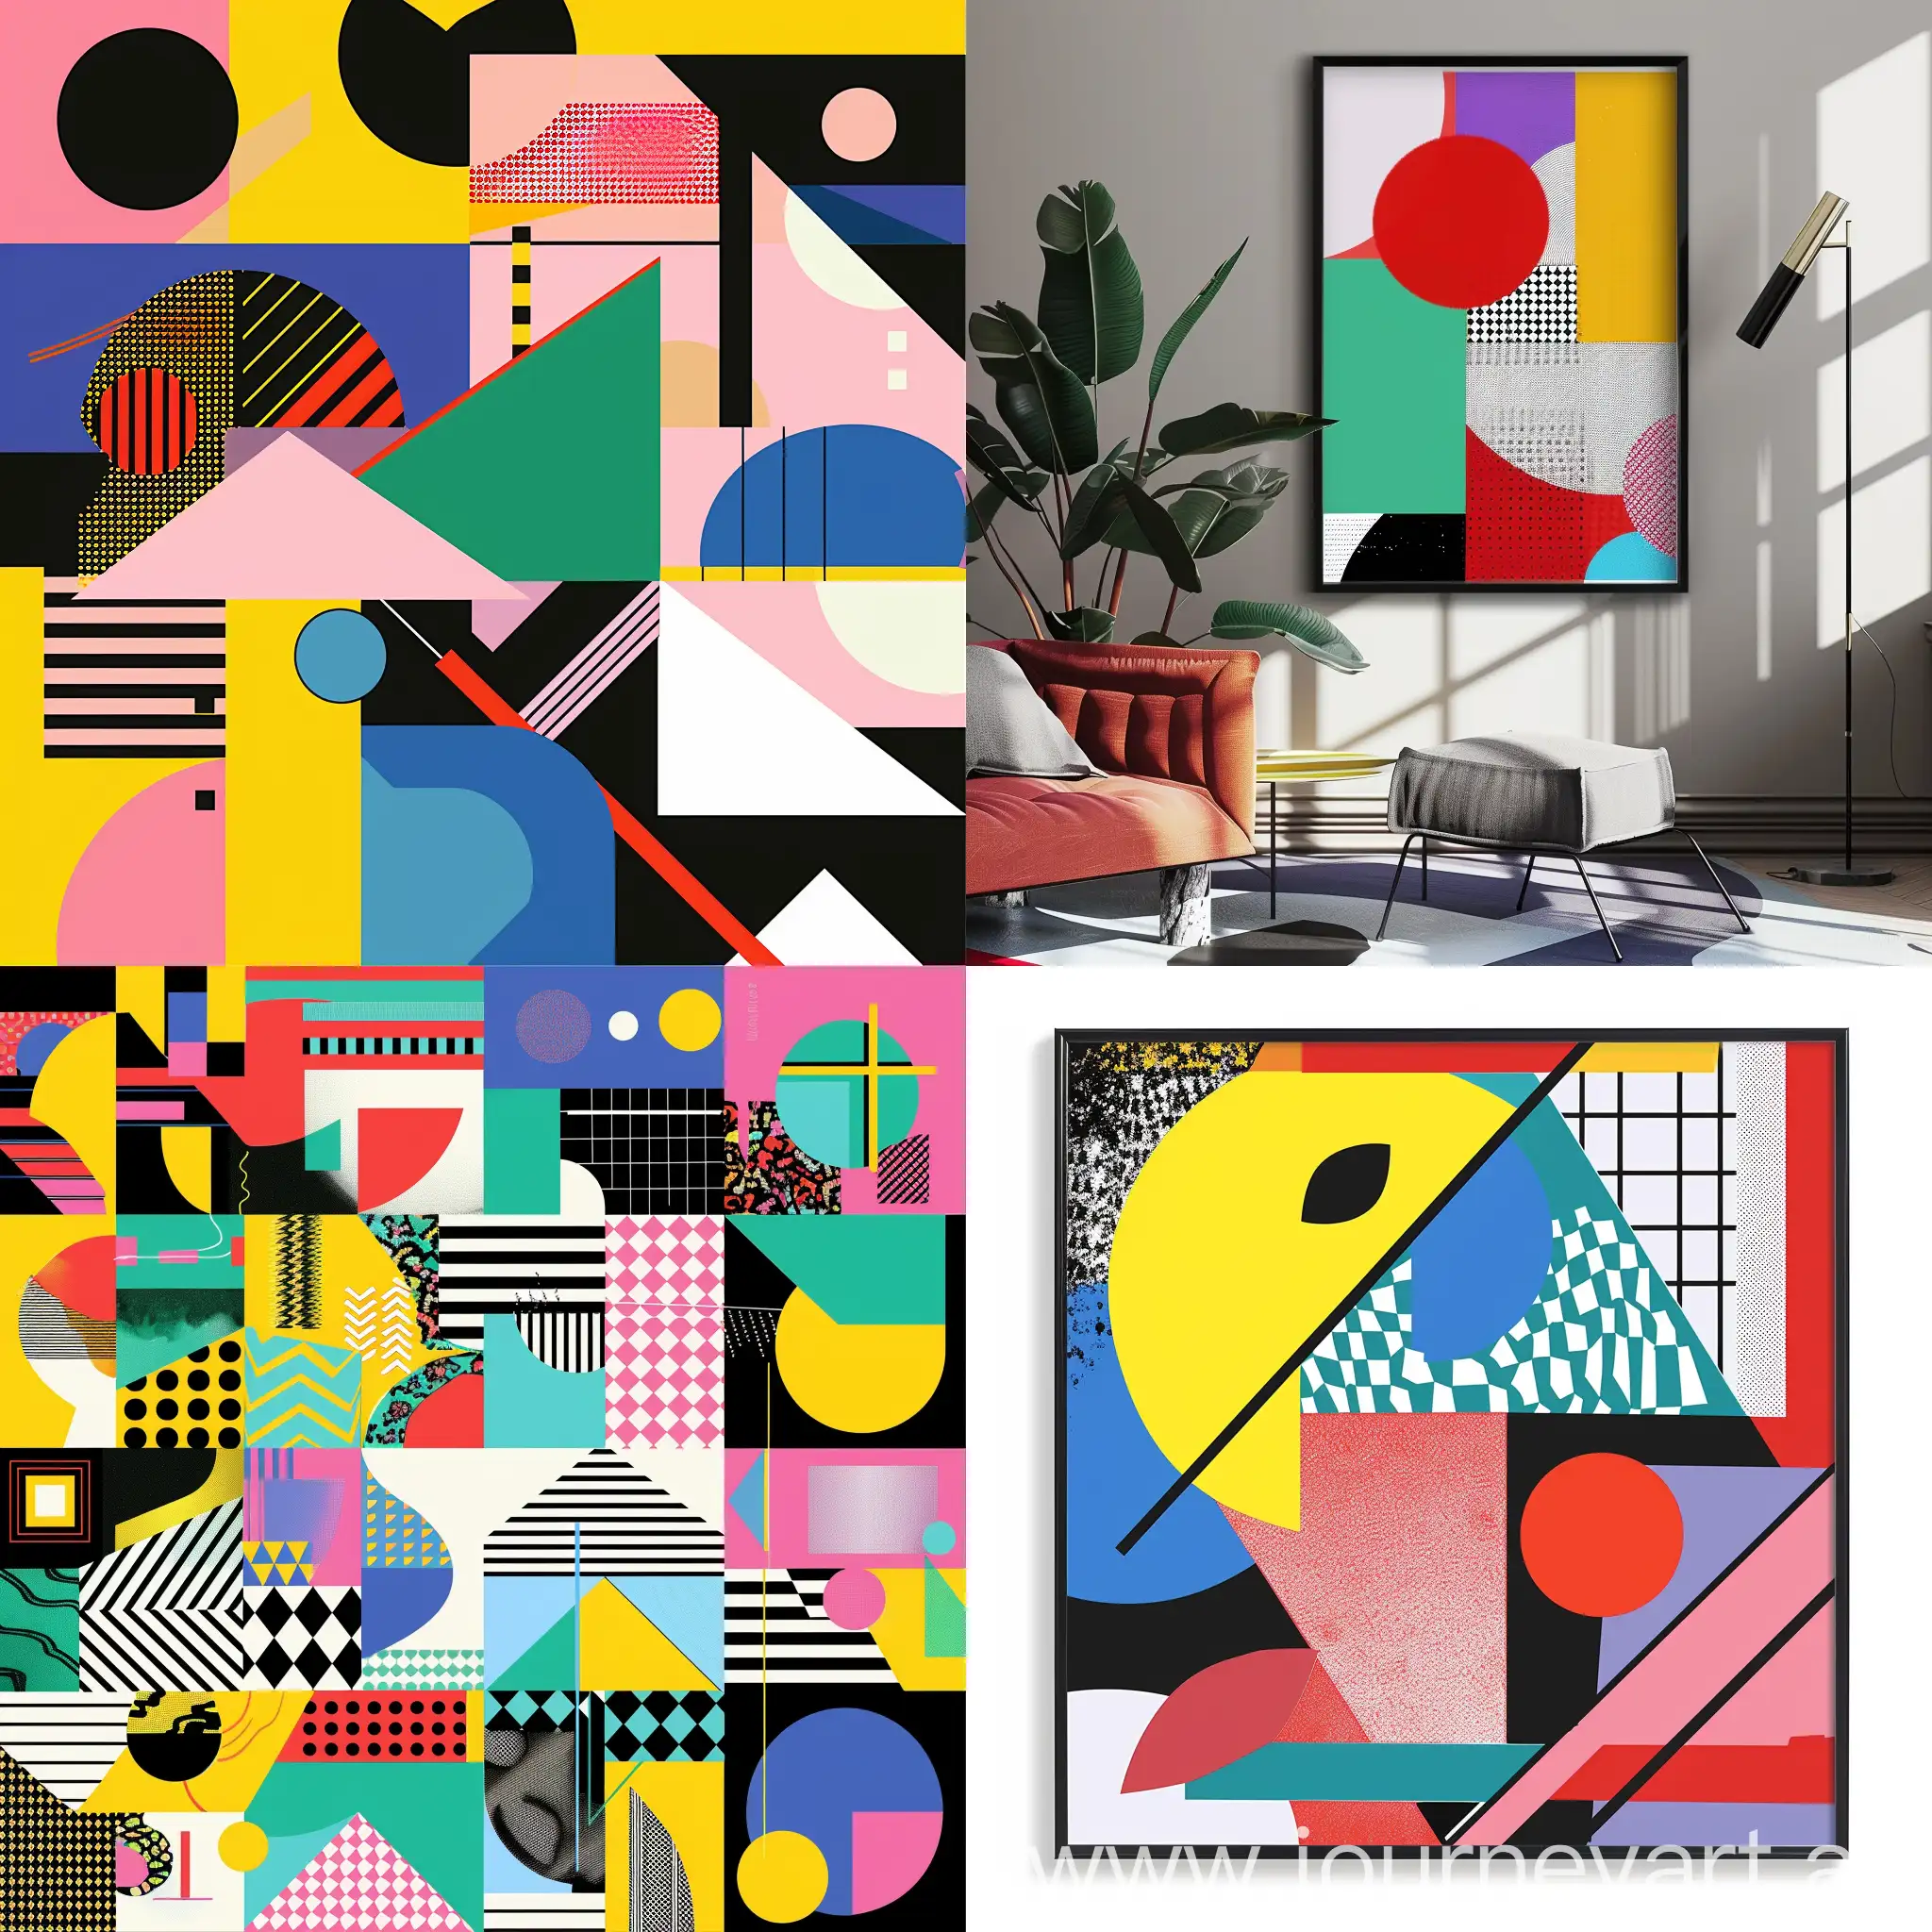 Geometric-Abstract-Poster-in-Memphis-Style-with-Vibrant-Colors